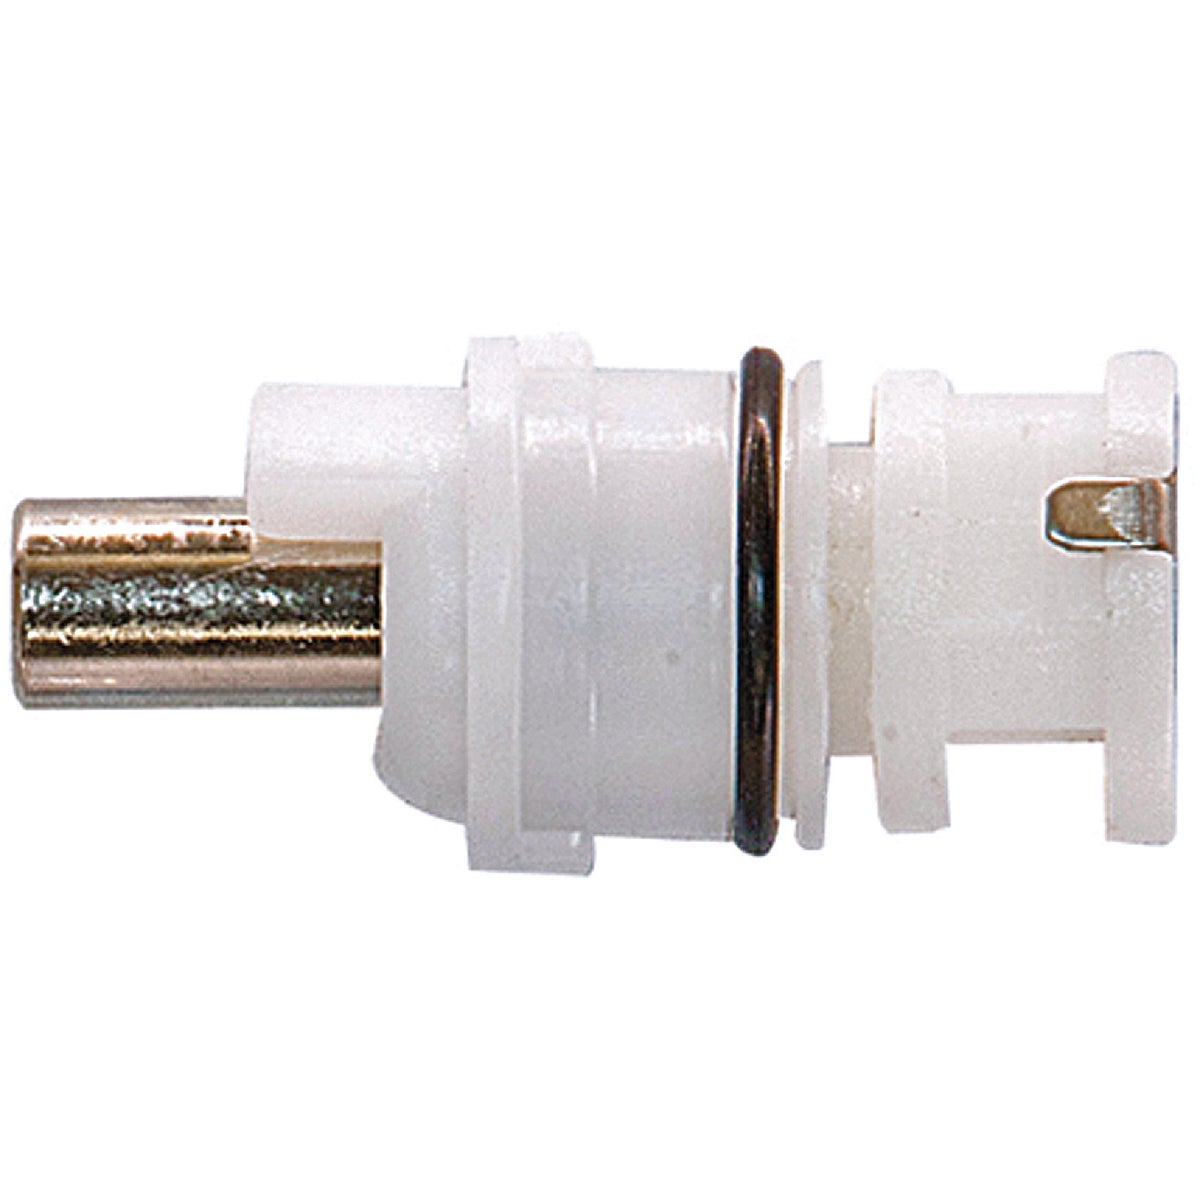 Item 404480, Repair your leaky faucet with the Danco 3S-8H/C Hot/Cold stem for Delta 